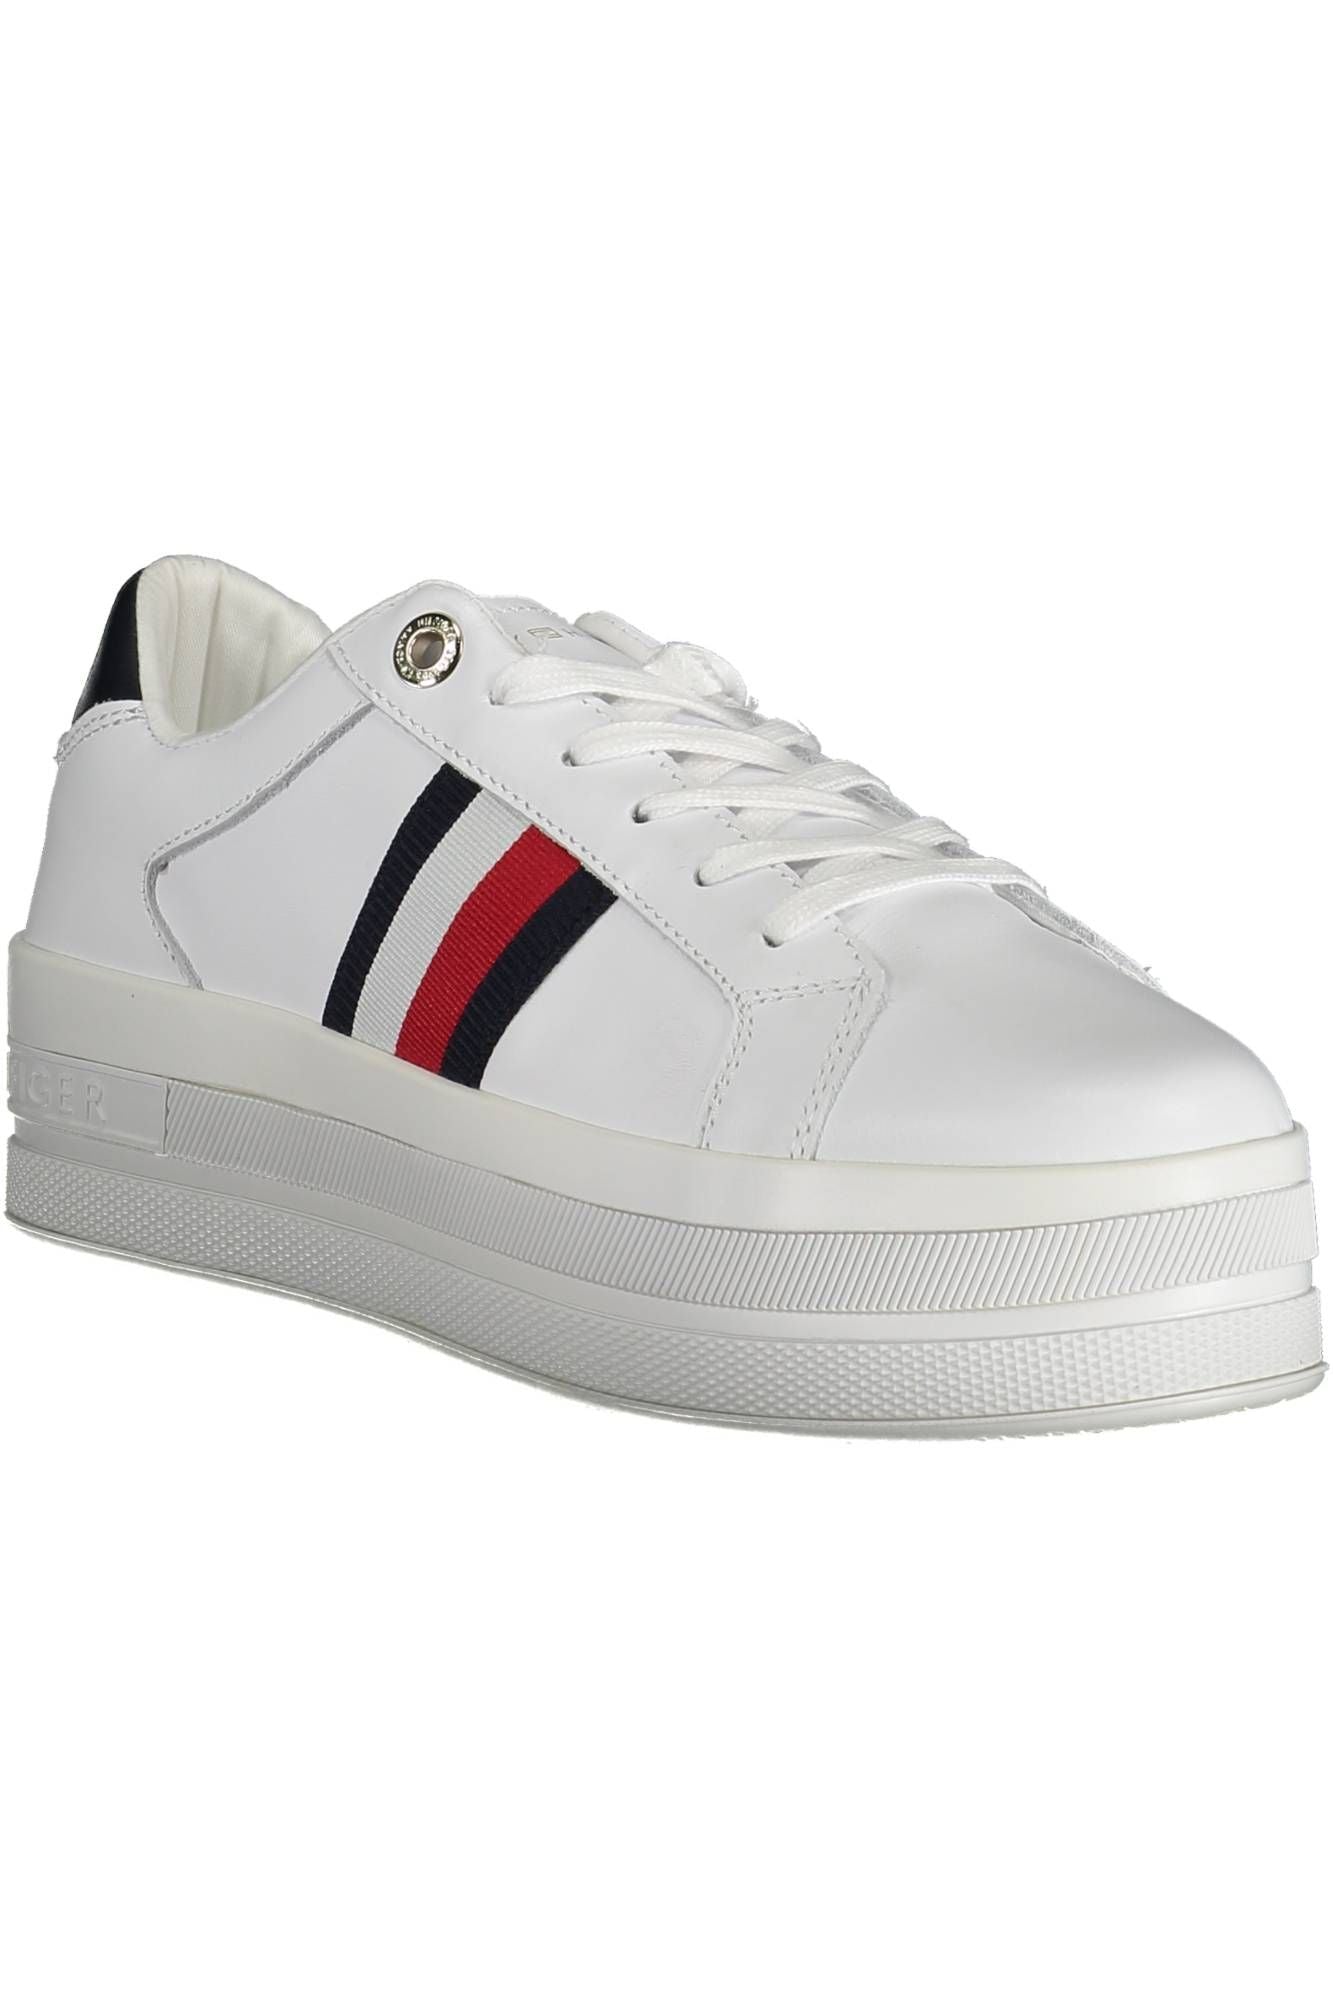 Tommy Hilfiger Sleek White Sneakers with Eco-Conscious Appeal